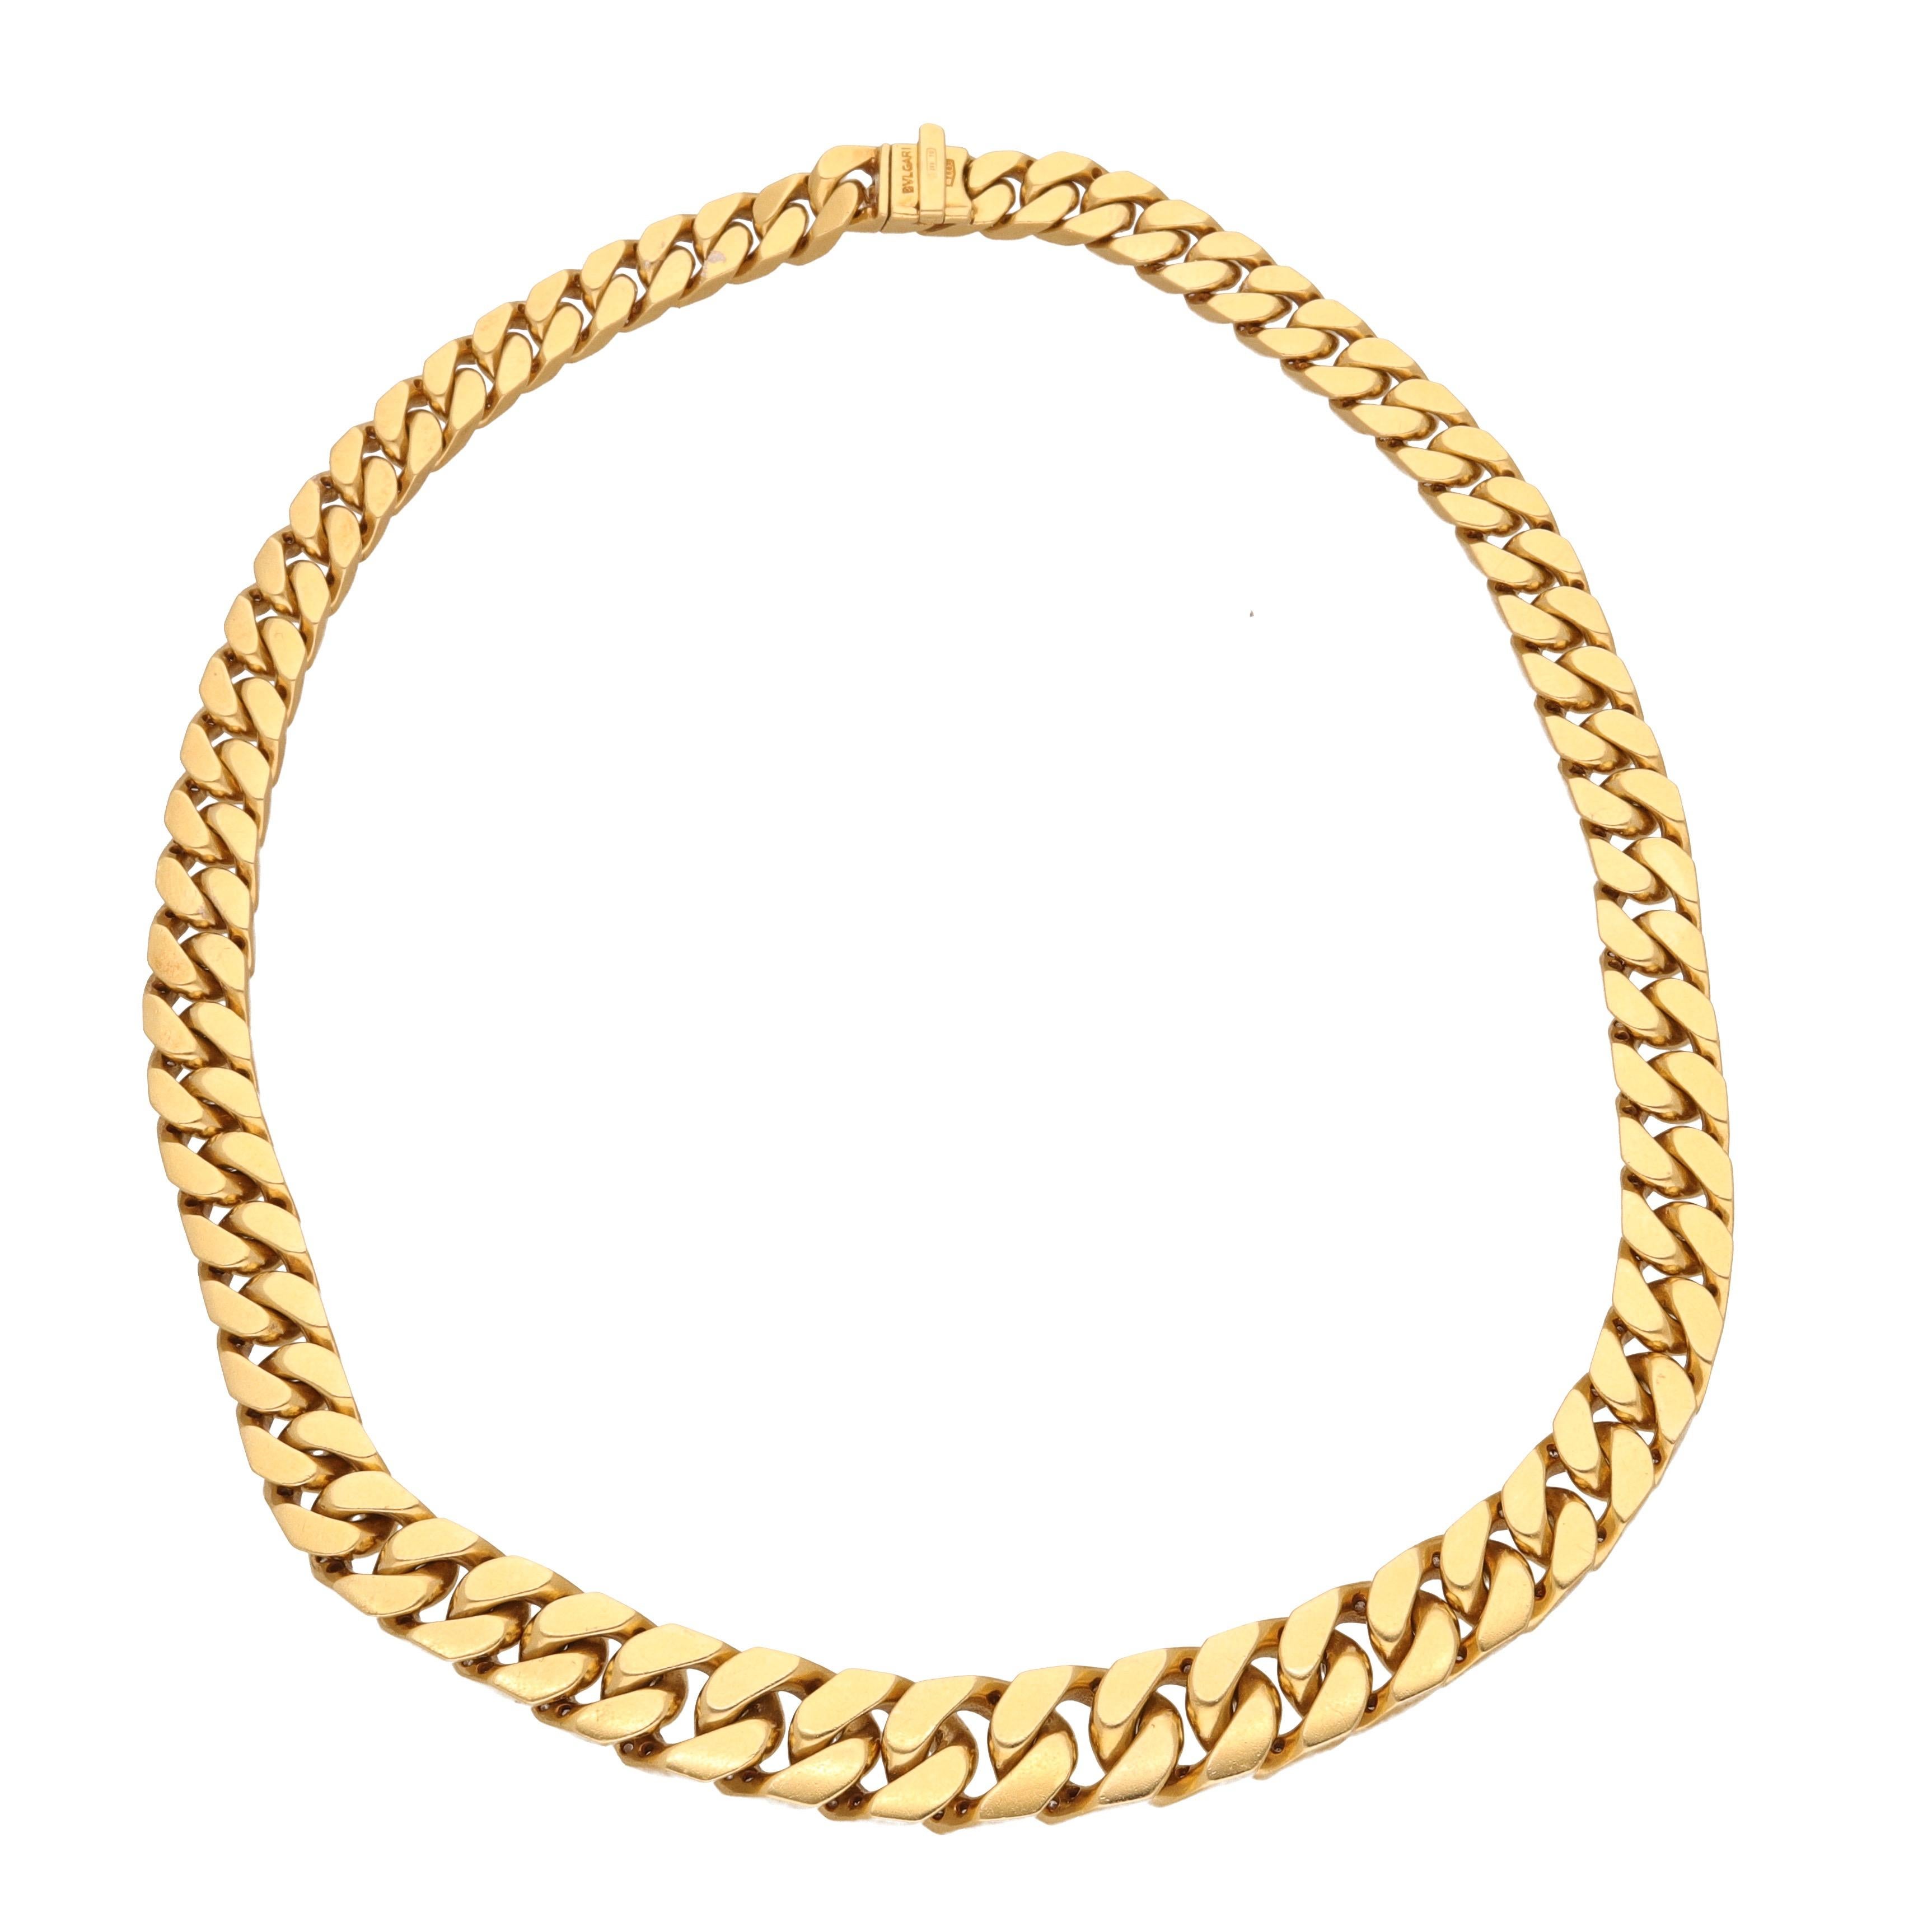 18 kt. yellow gold with 6.50 carat of round-cut diamonds signed by Bulgari.
This vintage classic necklace is realized with flat chain and invisible clasp.
Comes with the original box.
1980 ca.